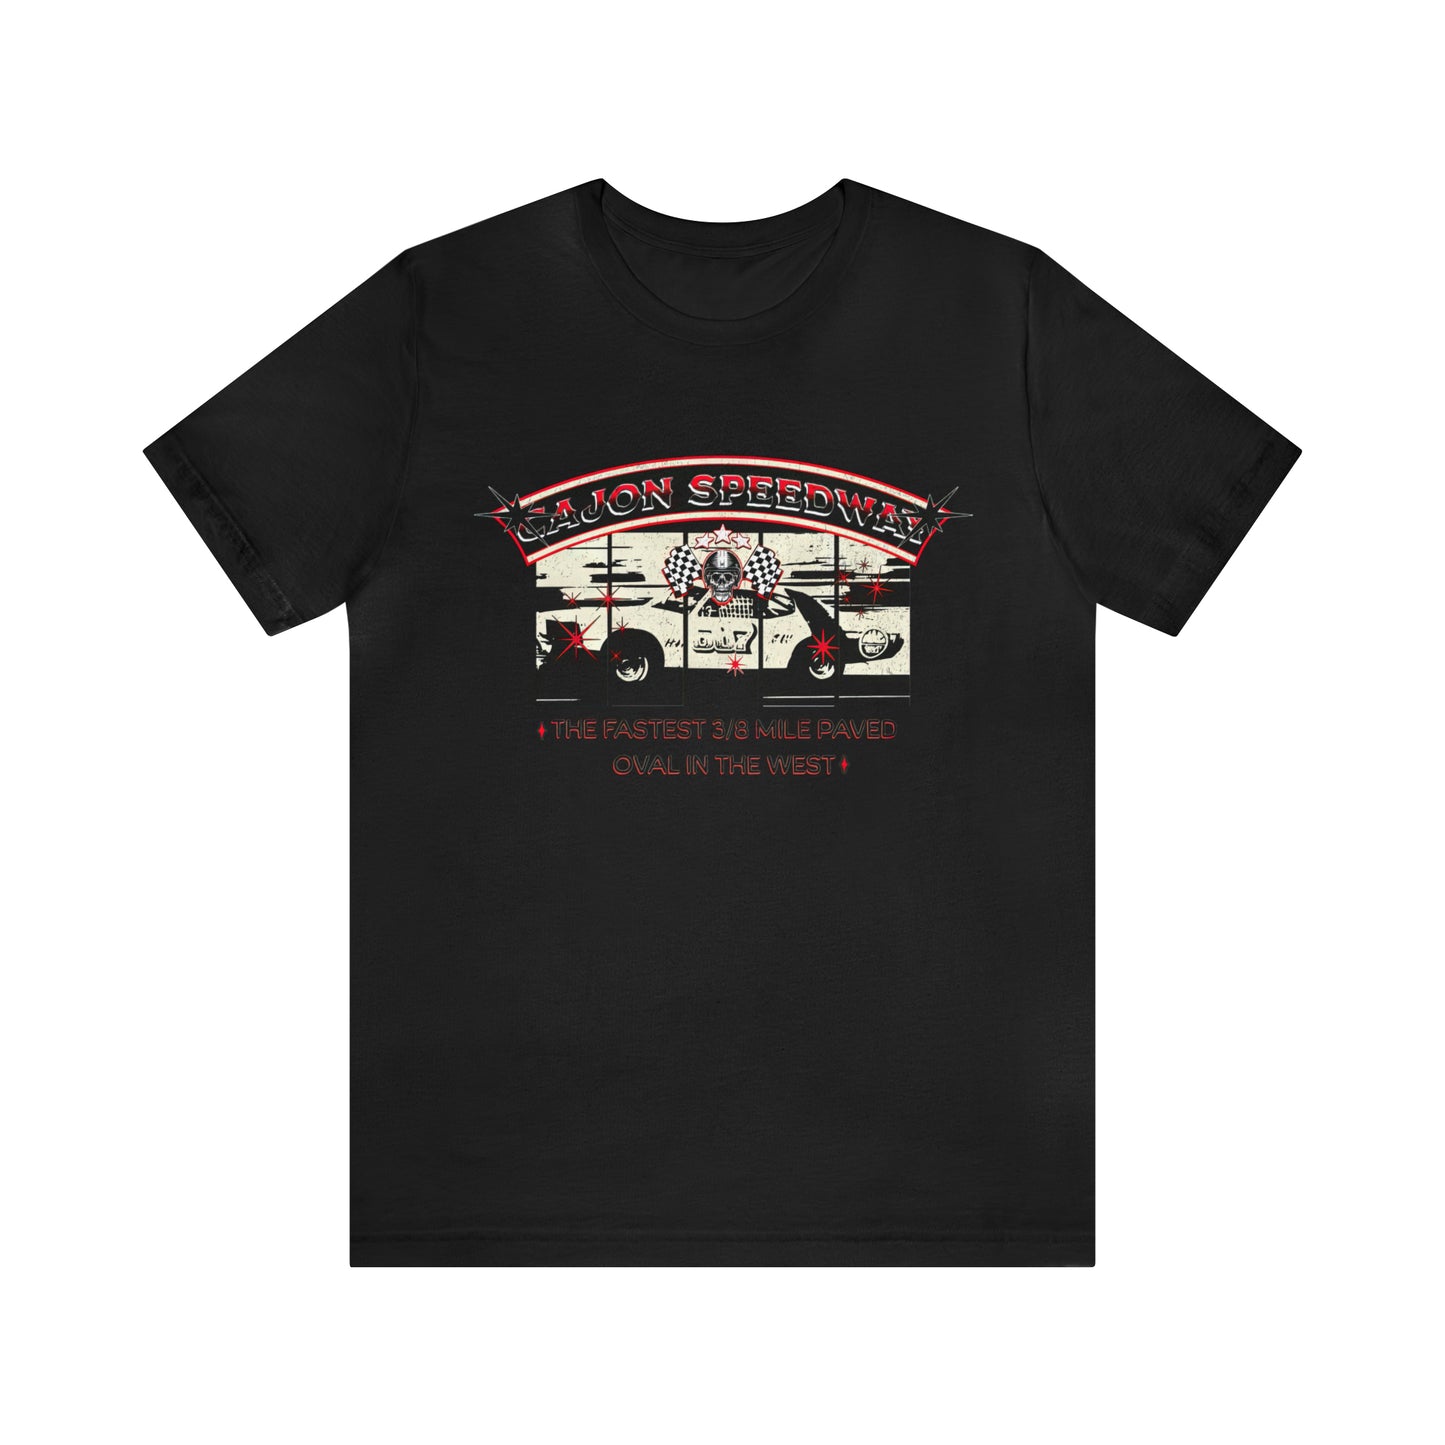 Cajon Speedway Fastest 3/8 Mile Paved Oval In The West - Retro Race Car T-Shirt